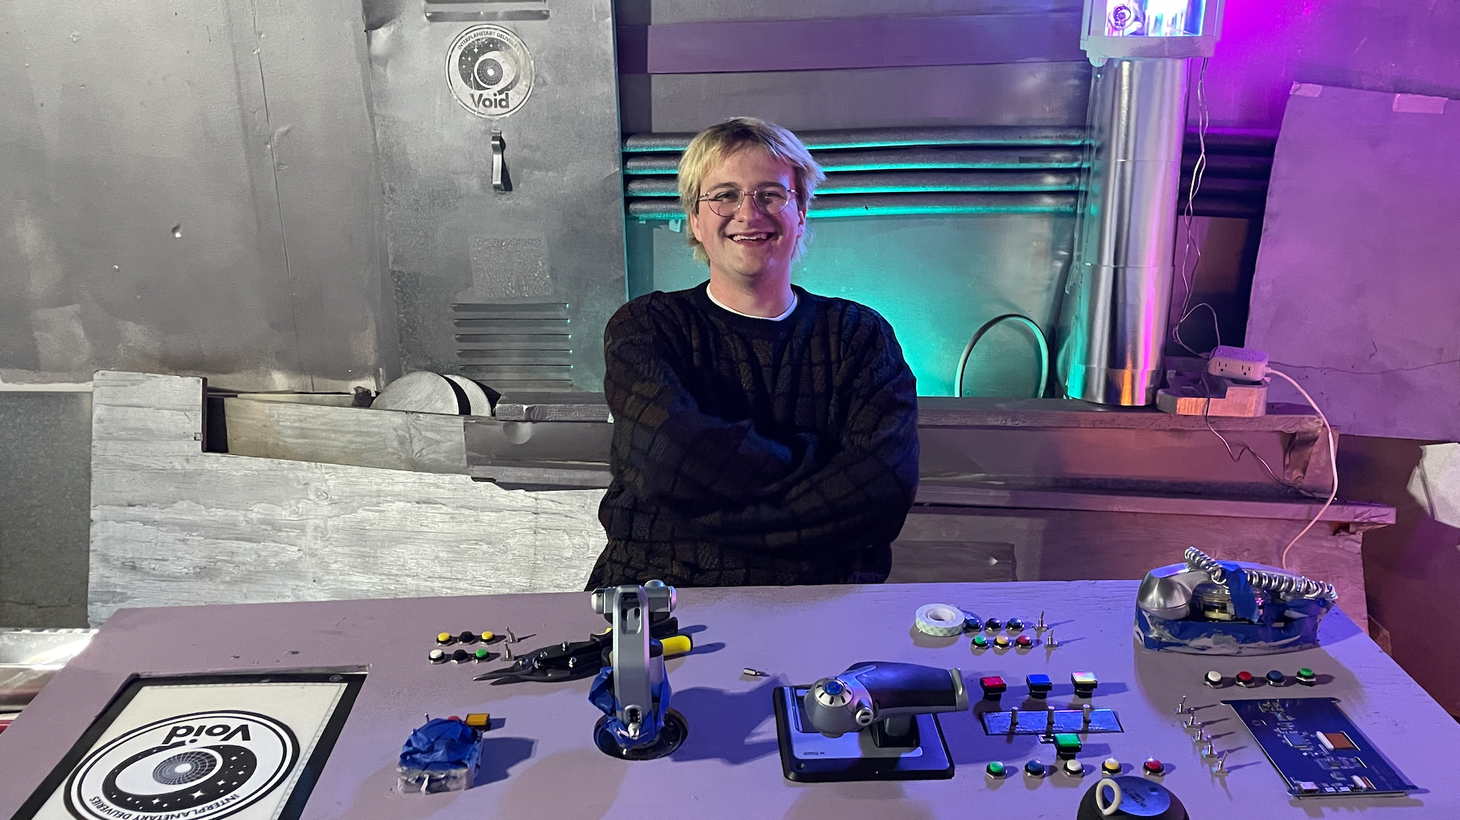 Elliott Walker, 22, sits at the controls of his homemade spaceship, the centerpiece of his latest TikTok series.